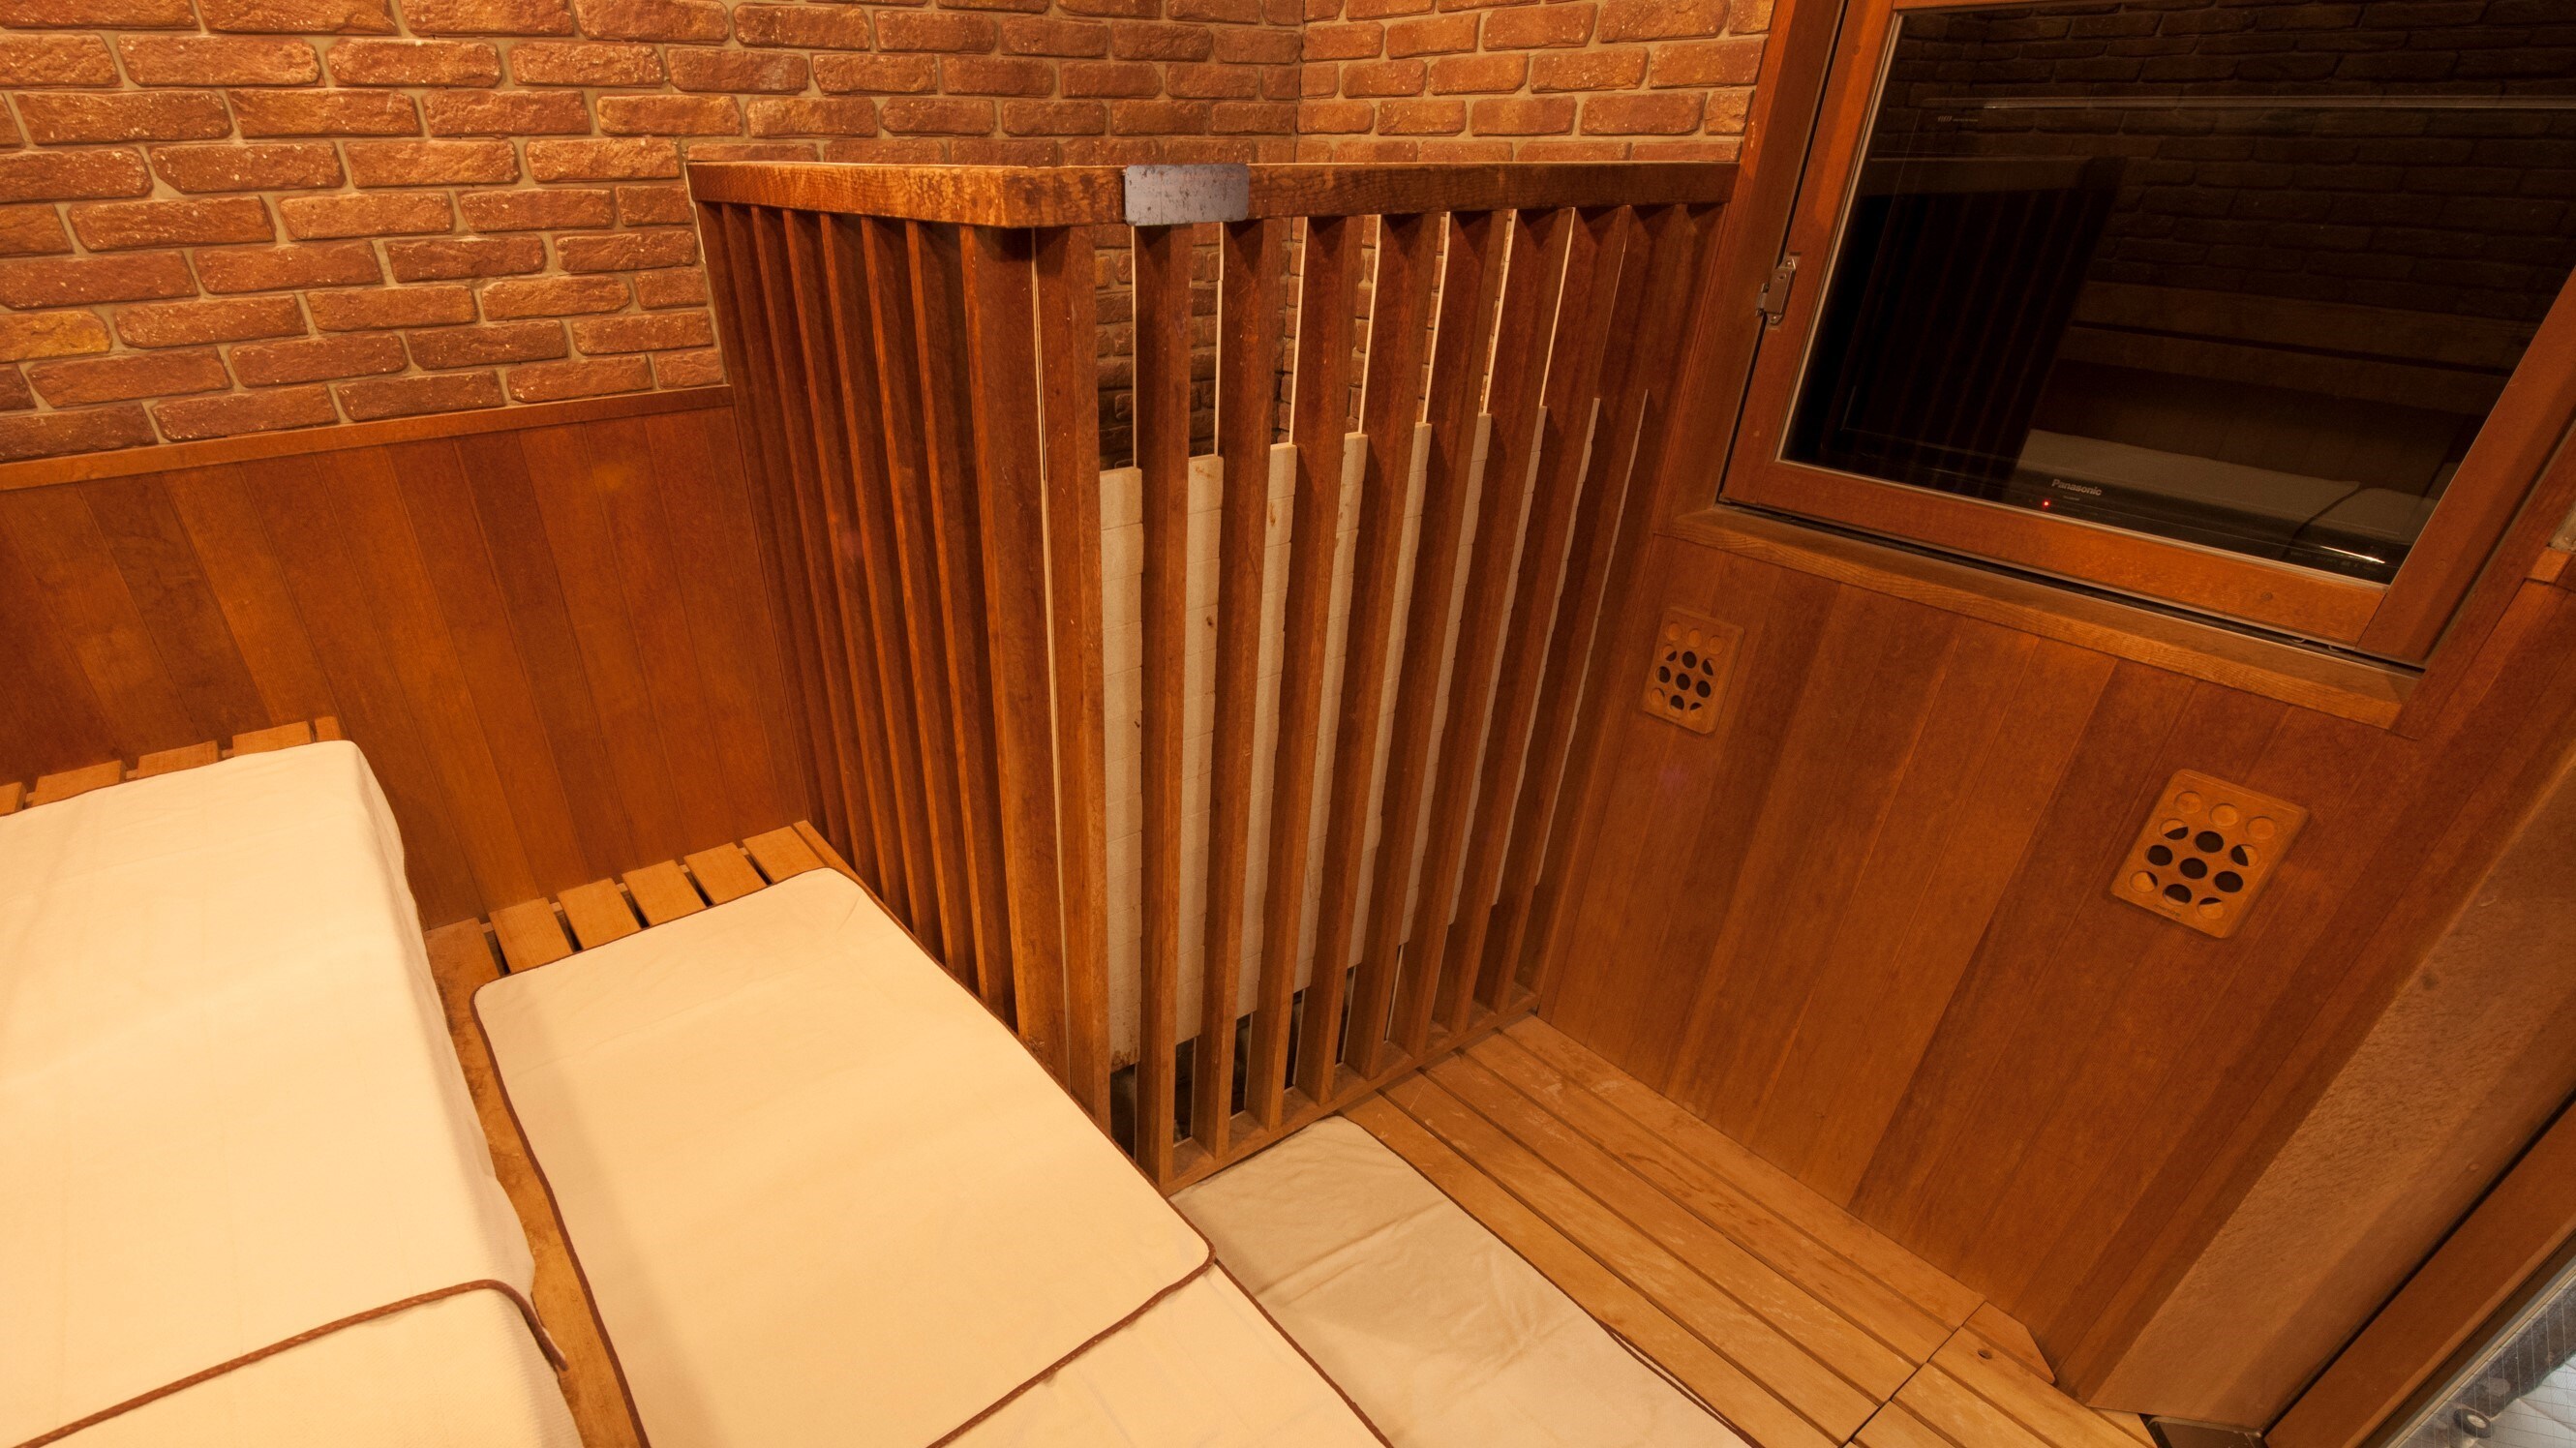 ◆ Large communal bath sauna [TV available] (room temperature 95 degrees / capacity 3 people)